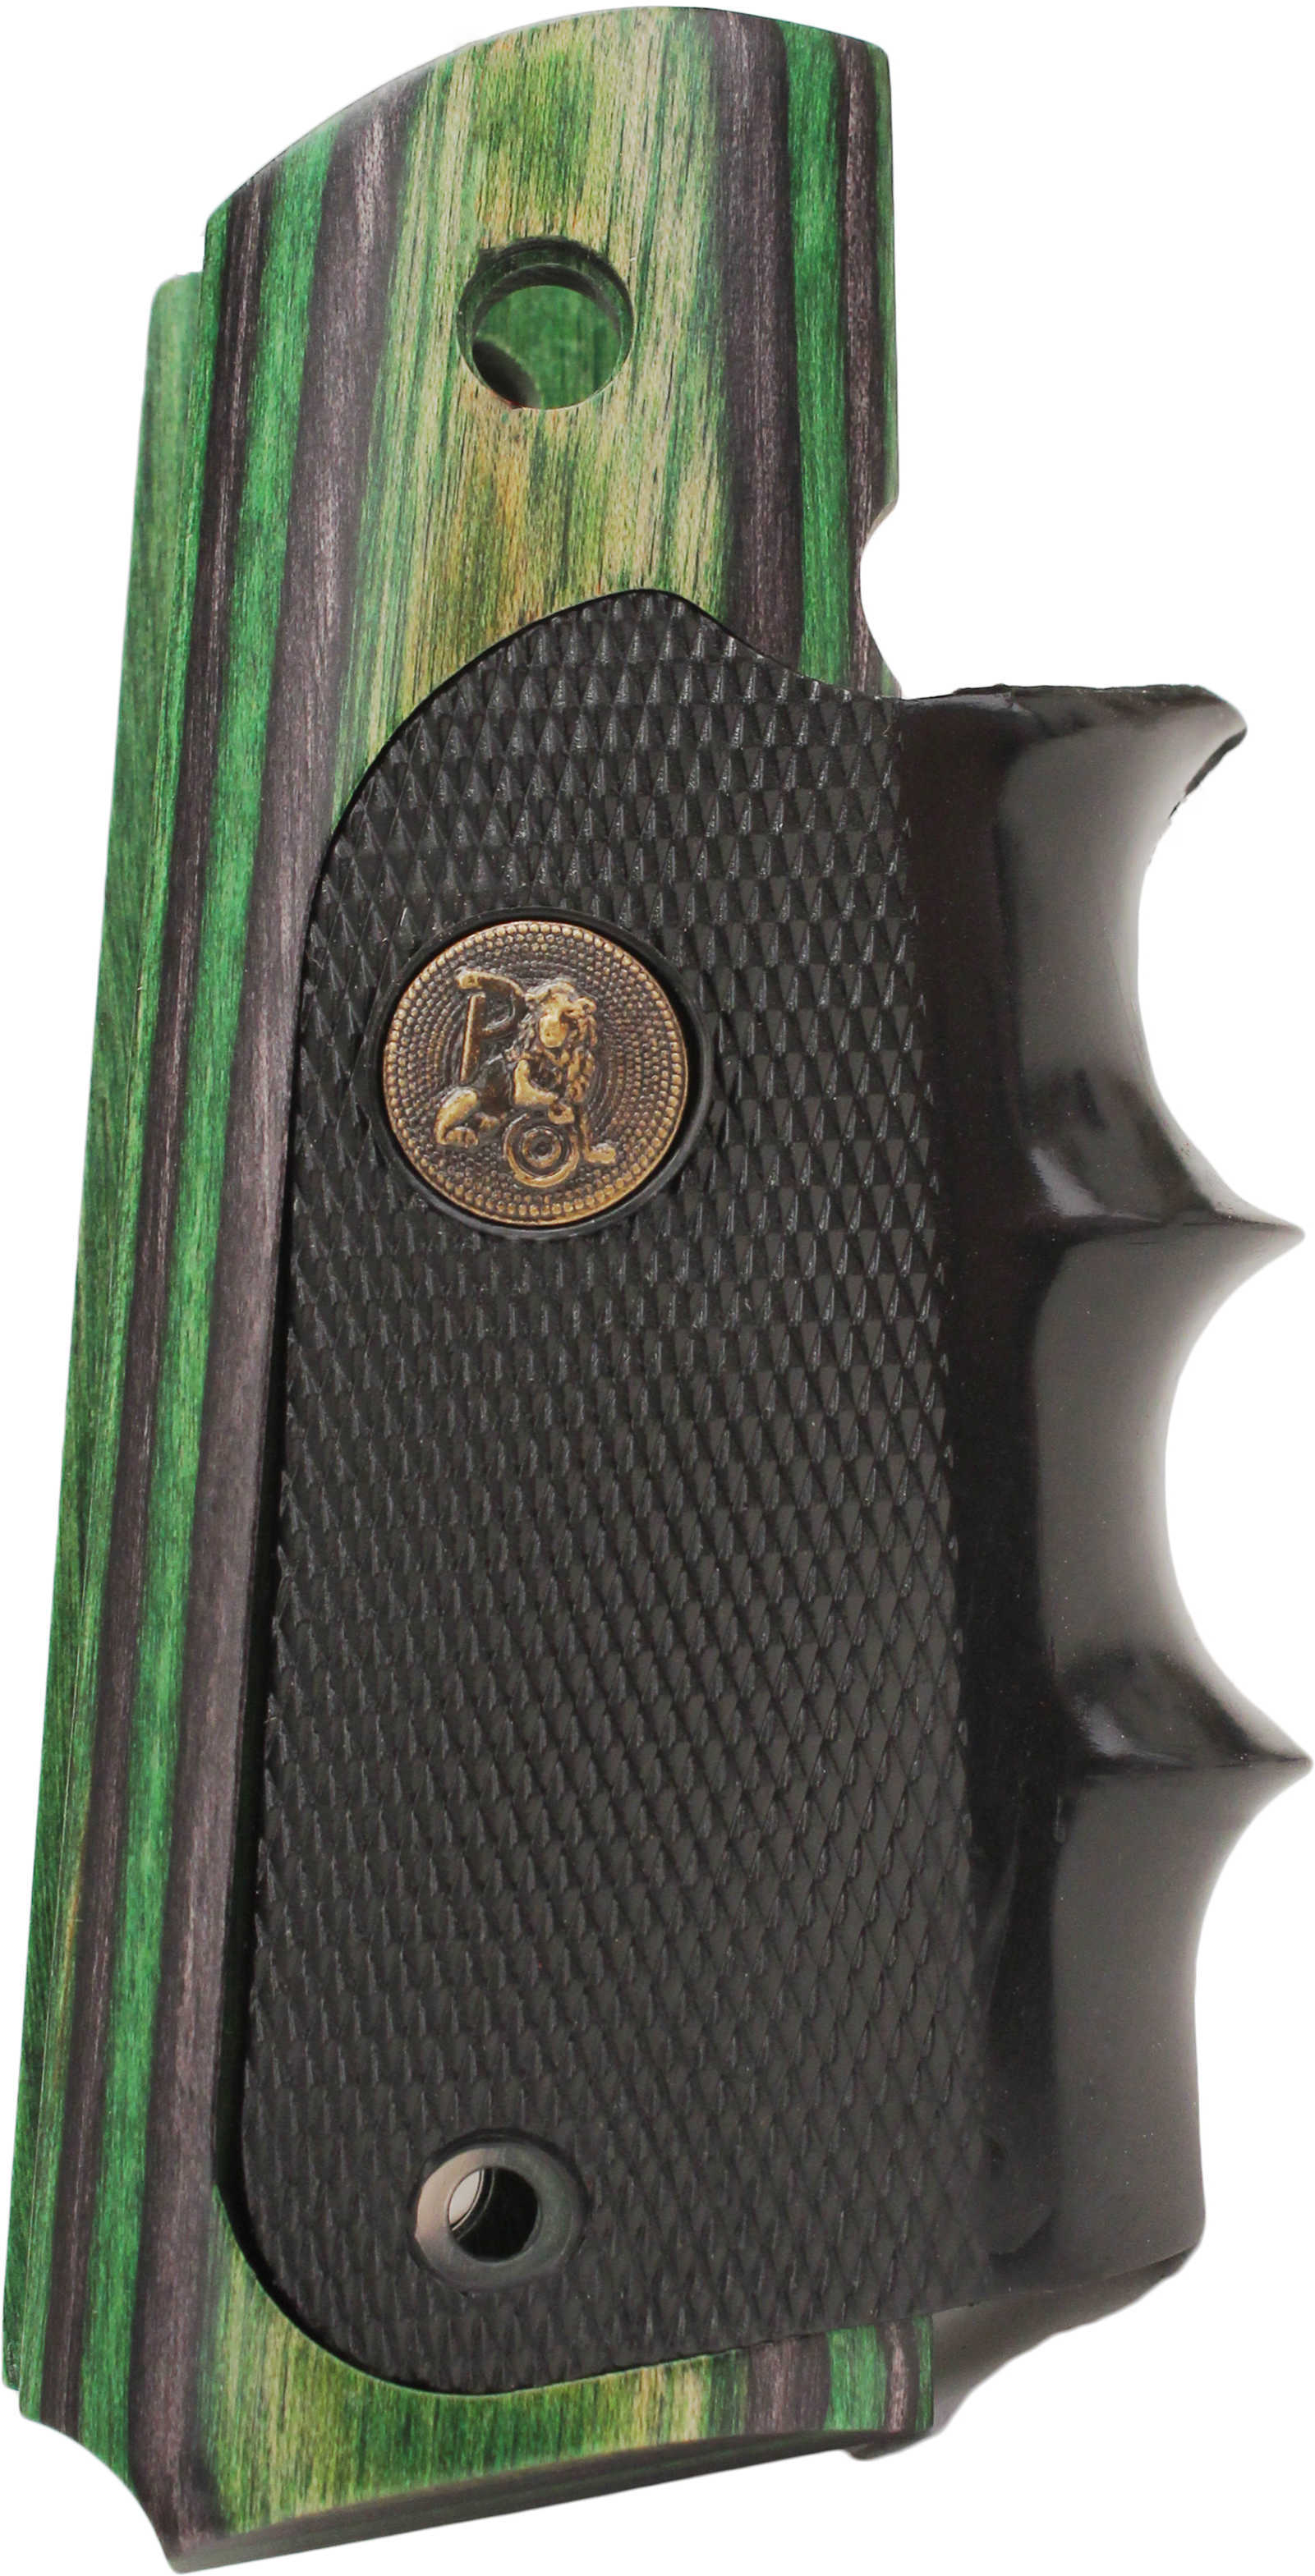 Pachmayr Colt 1911 Grip Evergreen Camo Laminate Md: 00432